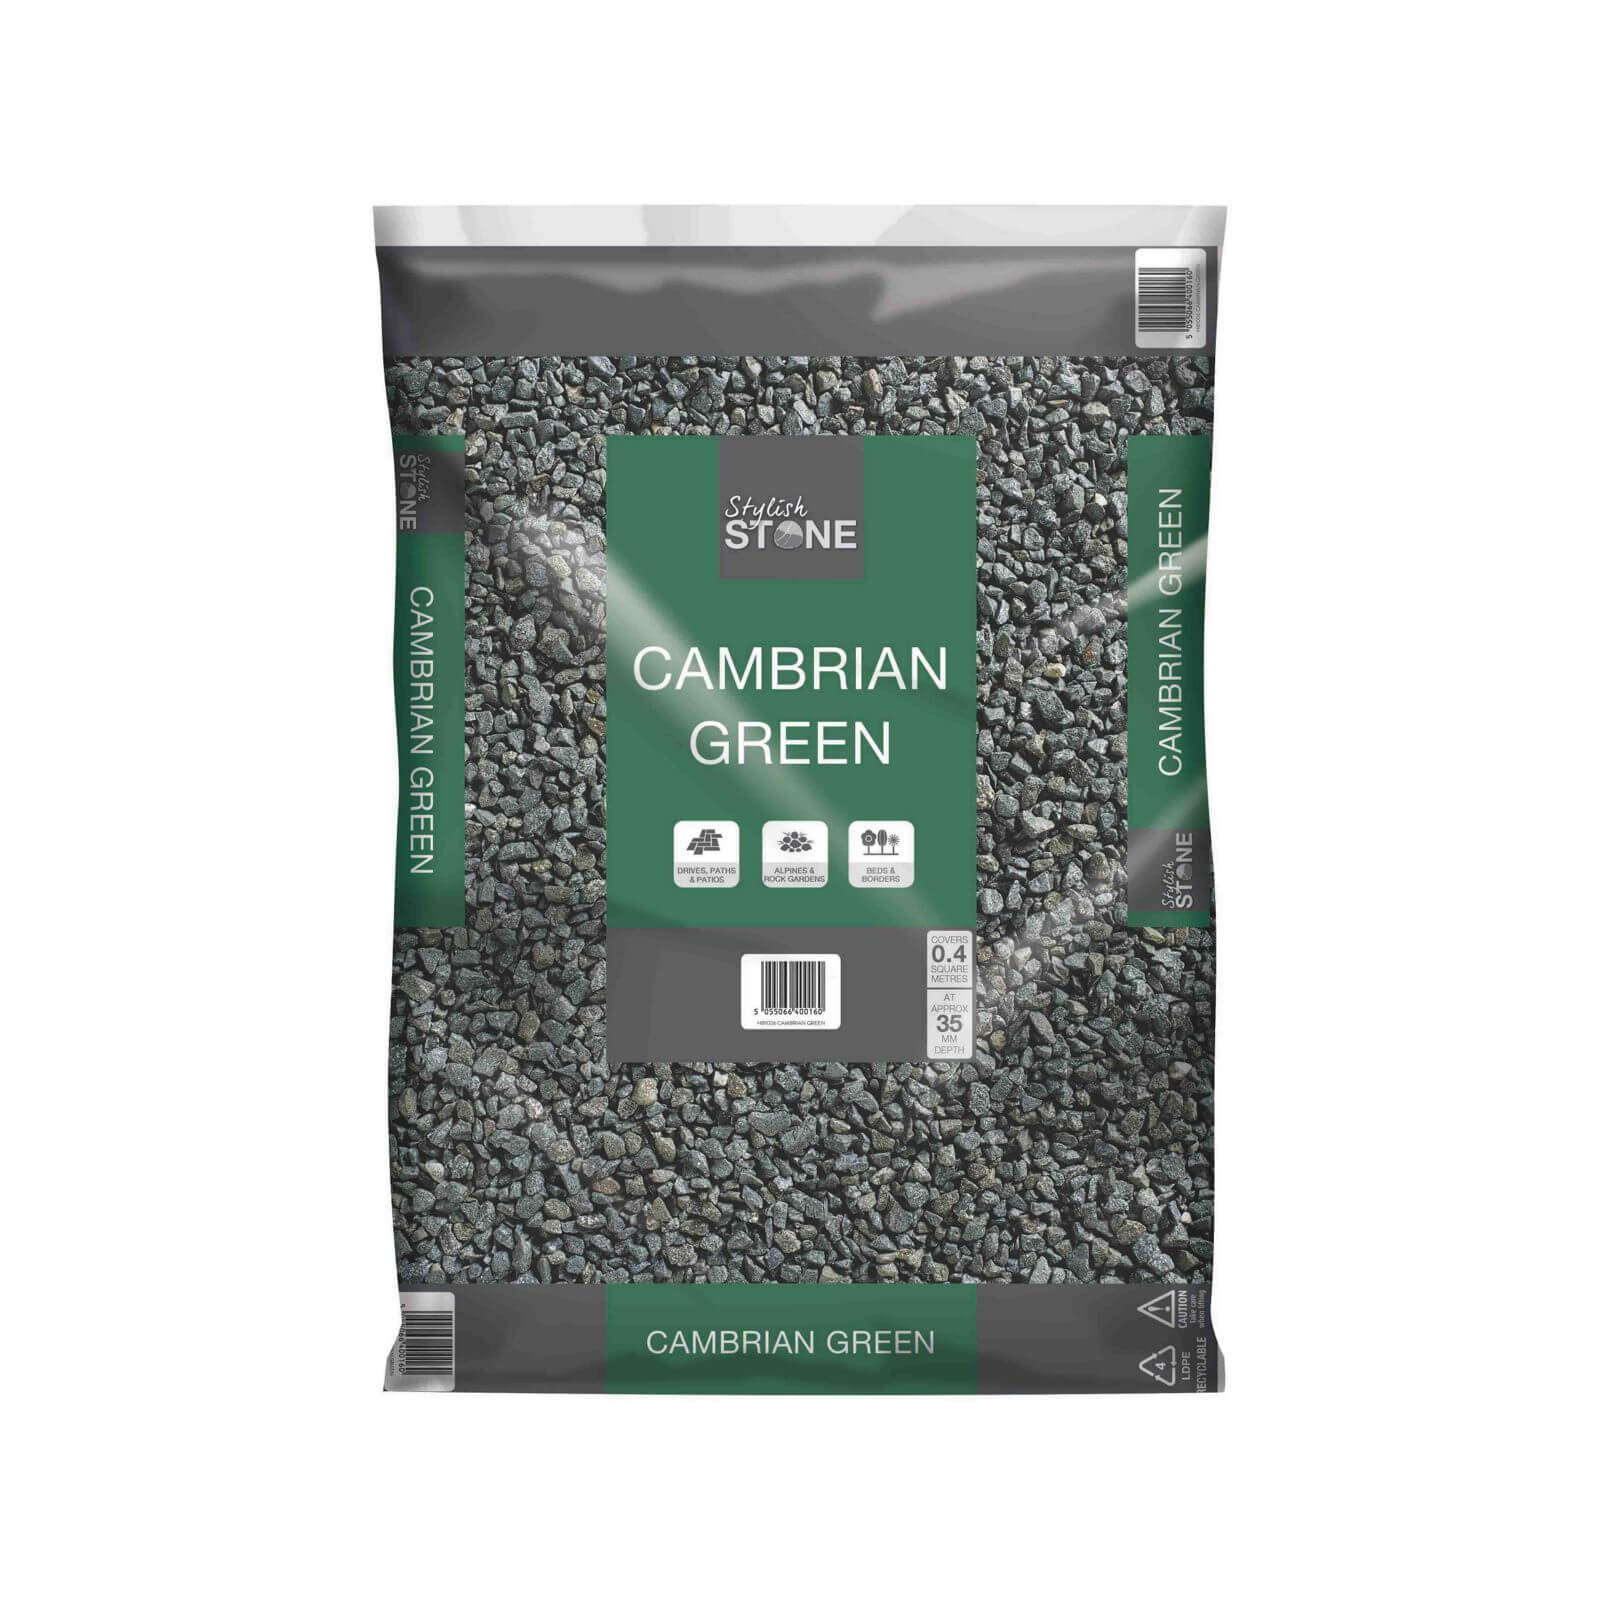 Stylish Stone Cambrian Green - Large Pack - 19kg